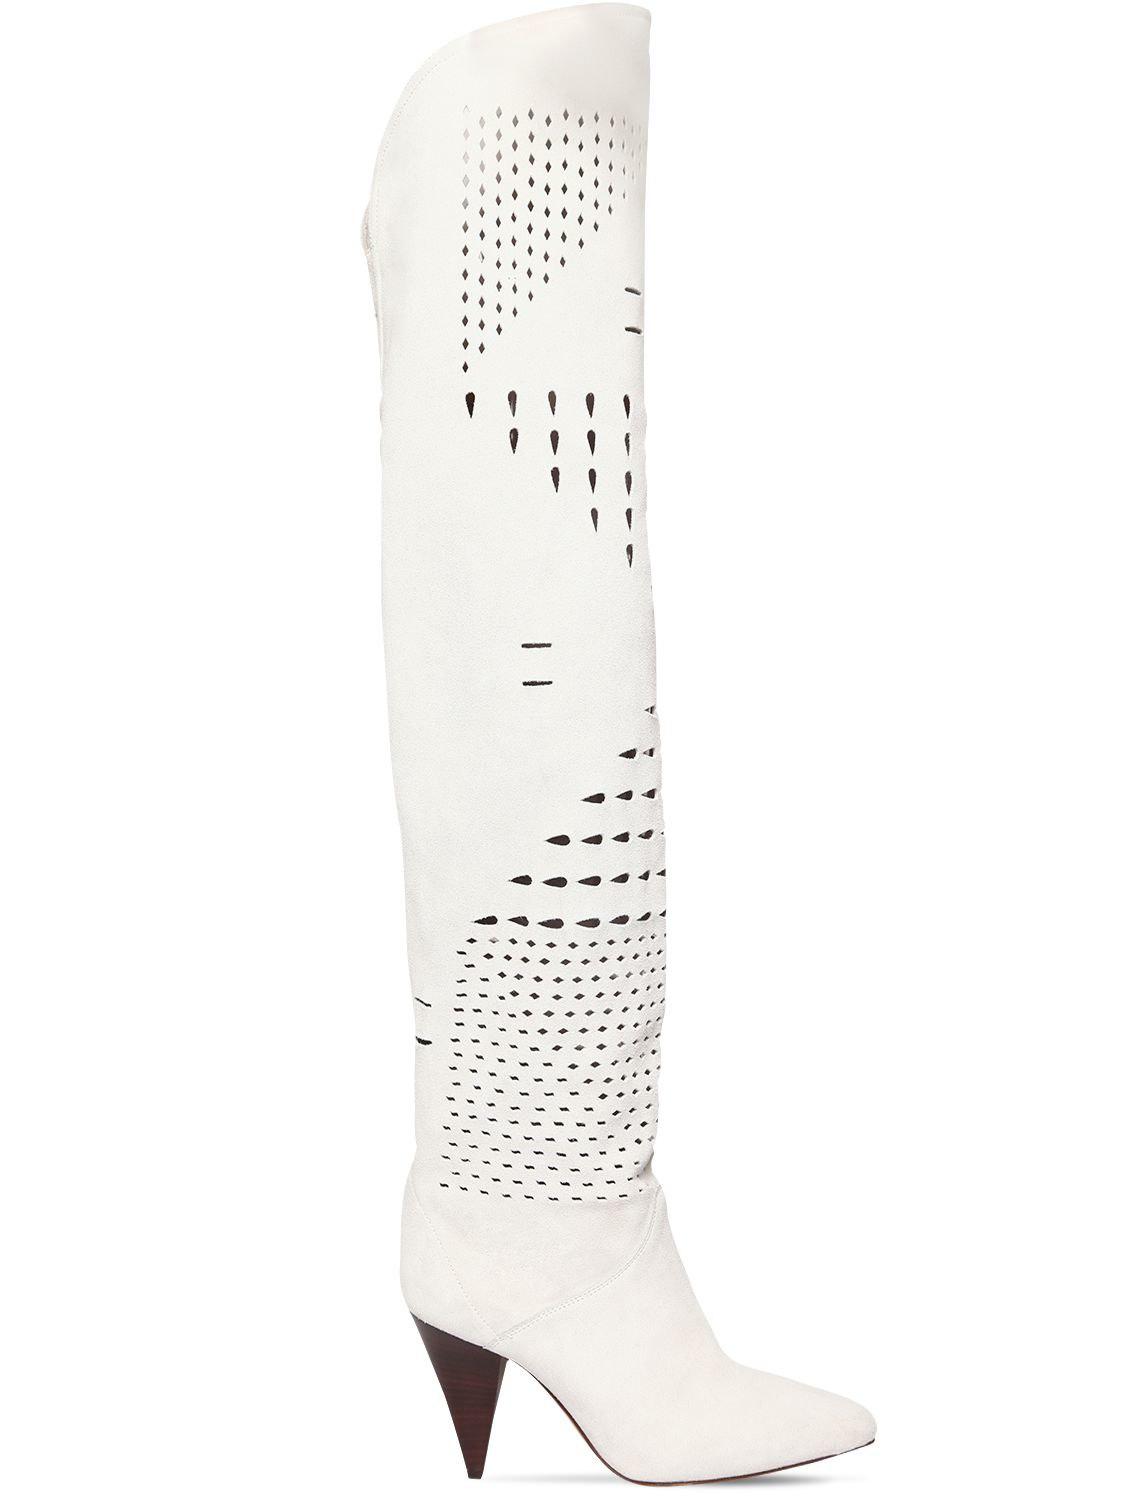 Isabel Marant 90mm Lyde Laser Cut Suede Slouchy Boots in White - Lyst